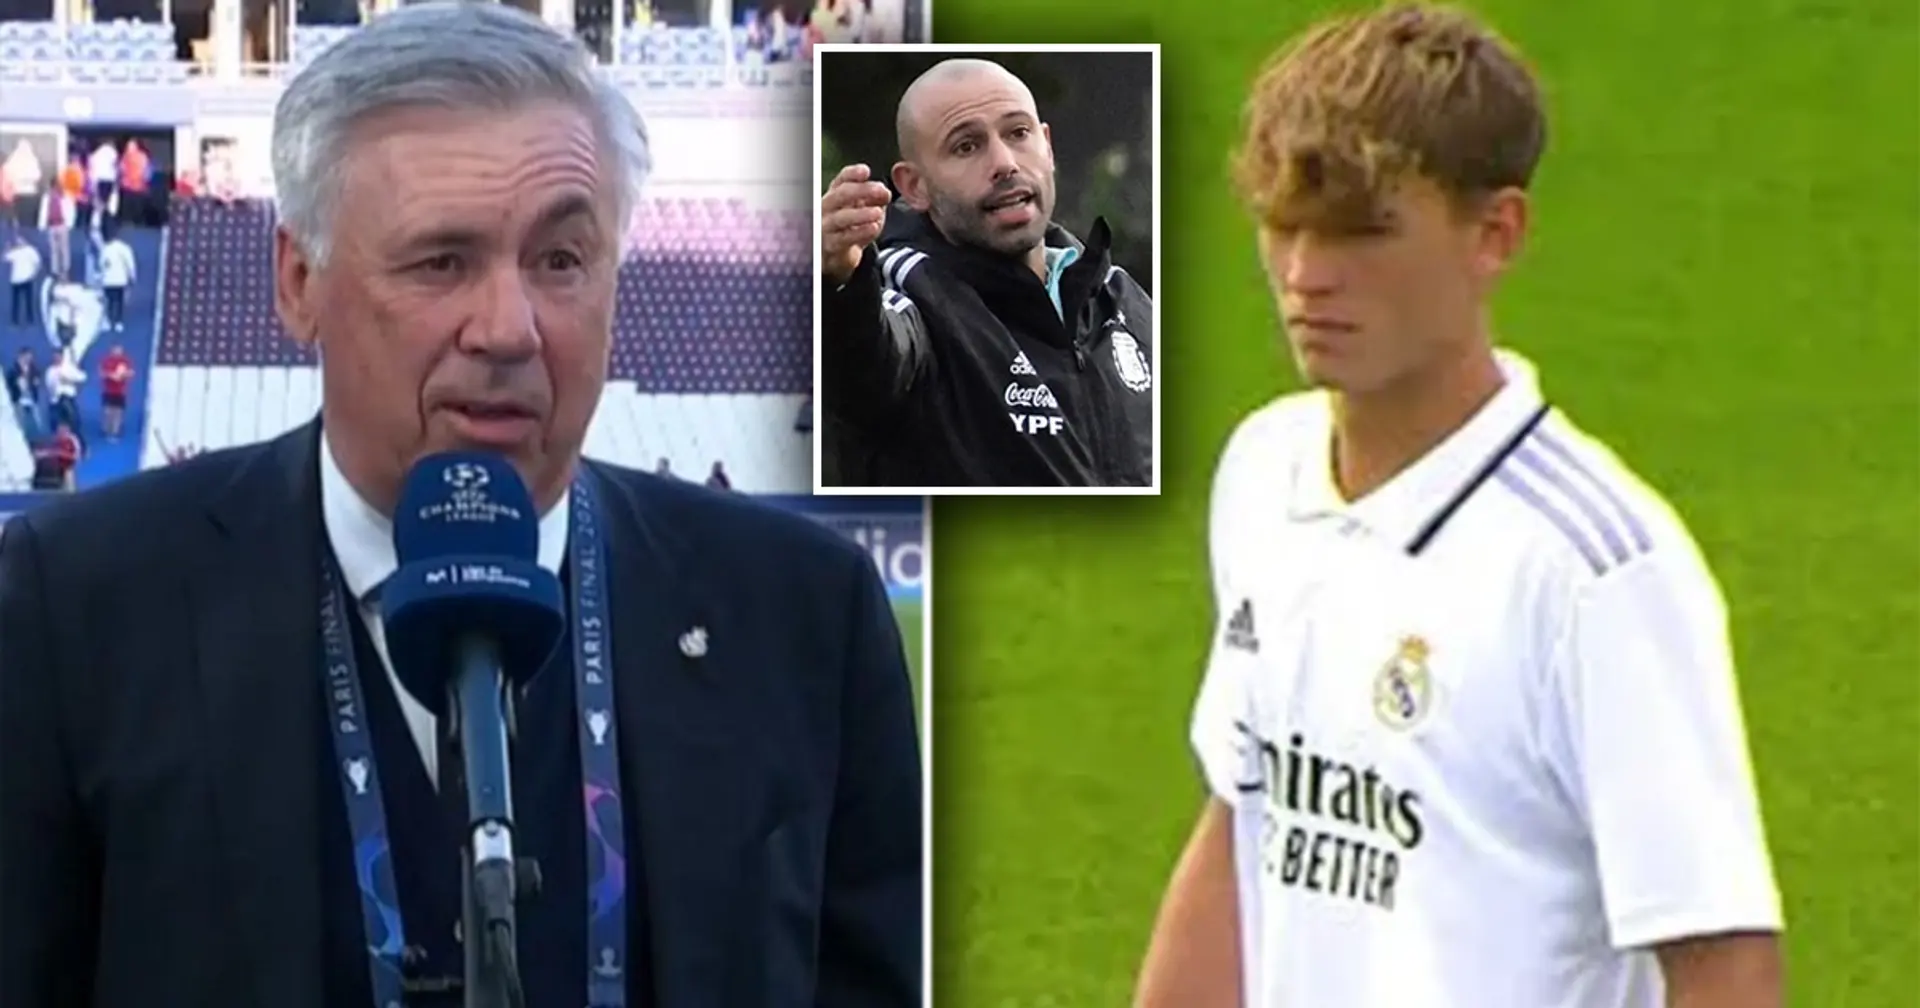 18-year-old Real Madrid talent 'dazzles' Ancelotti: 4 things to know about him